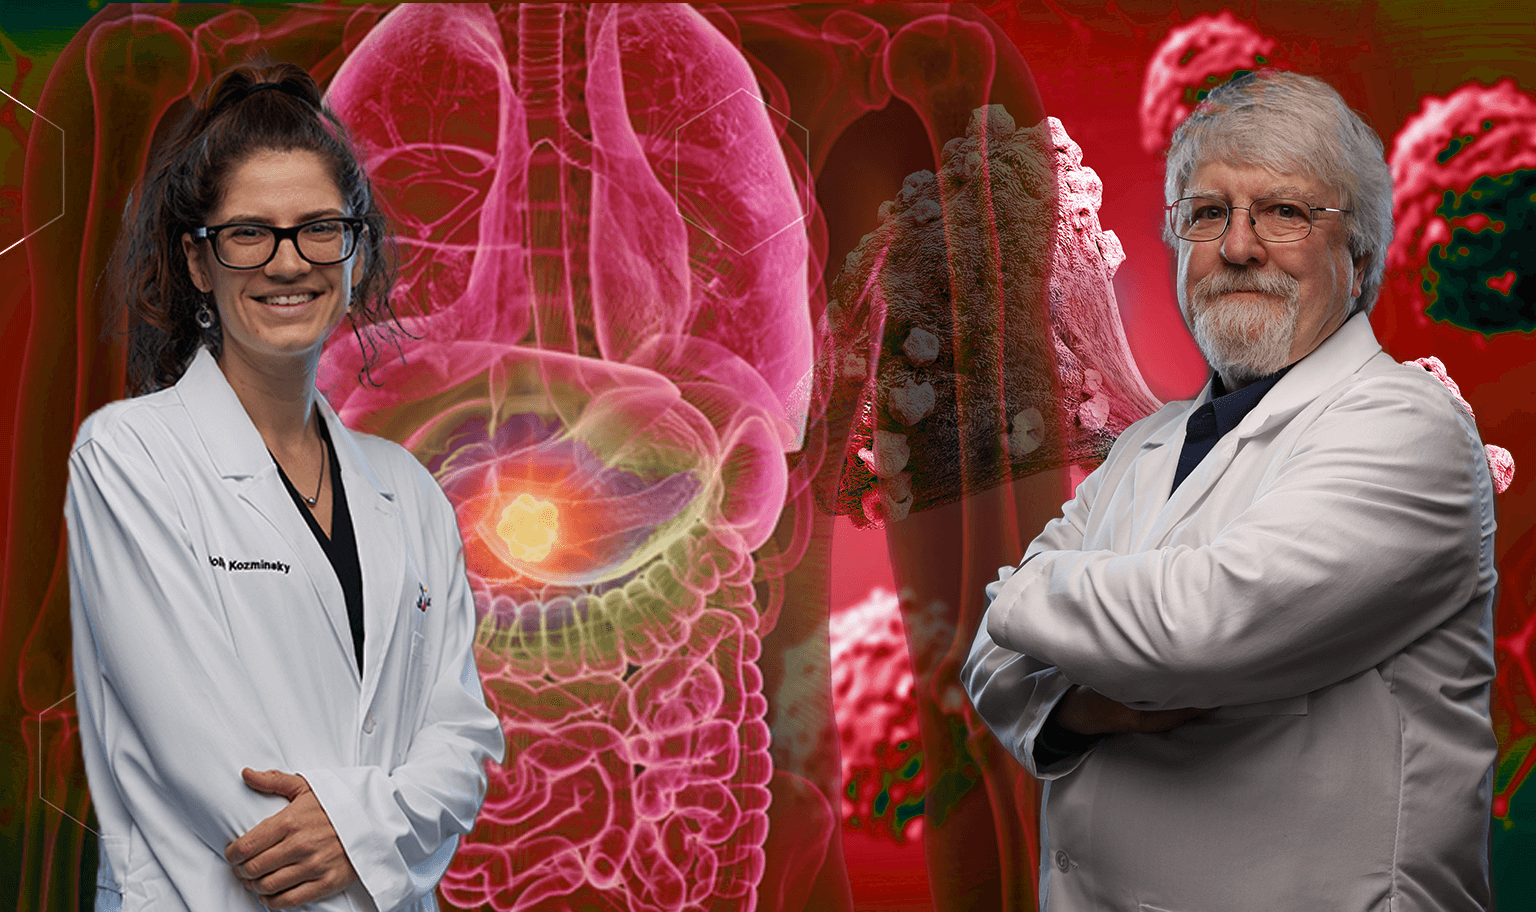 Iowa State Researchers Receive 2023 Barry Award to Investigate Cellular Structure of Pancreatic Cancer Tumors, Improve Treatment Outcomes…